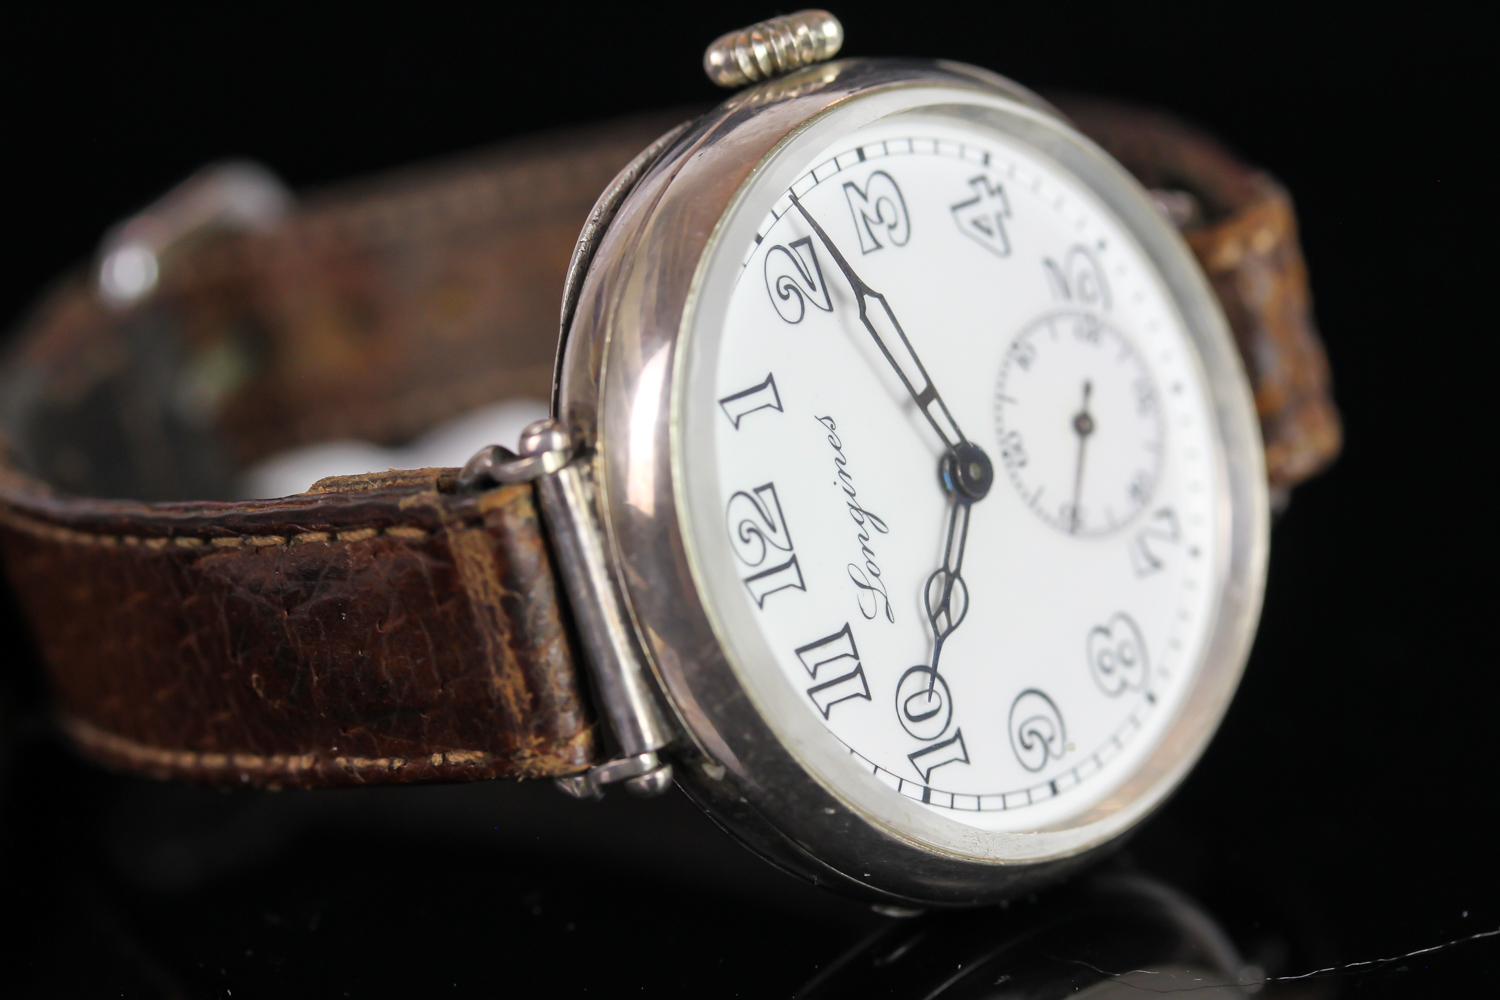 Rare Longines Albino Trench Watch, circular white porcelain dial with white Arabic numerals, - Image 2 of 7